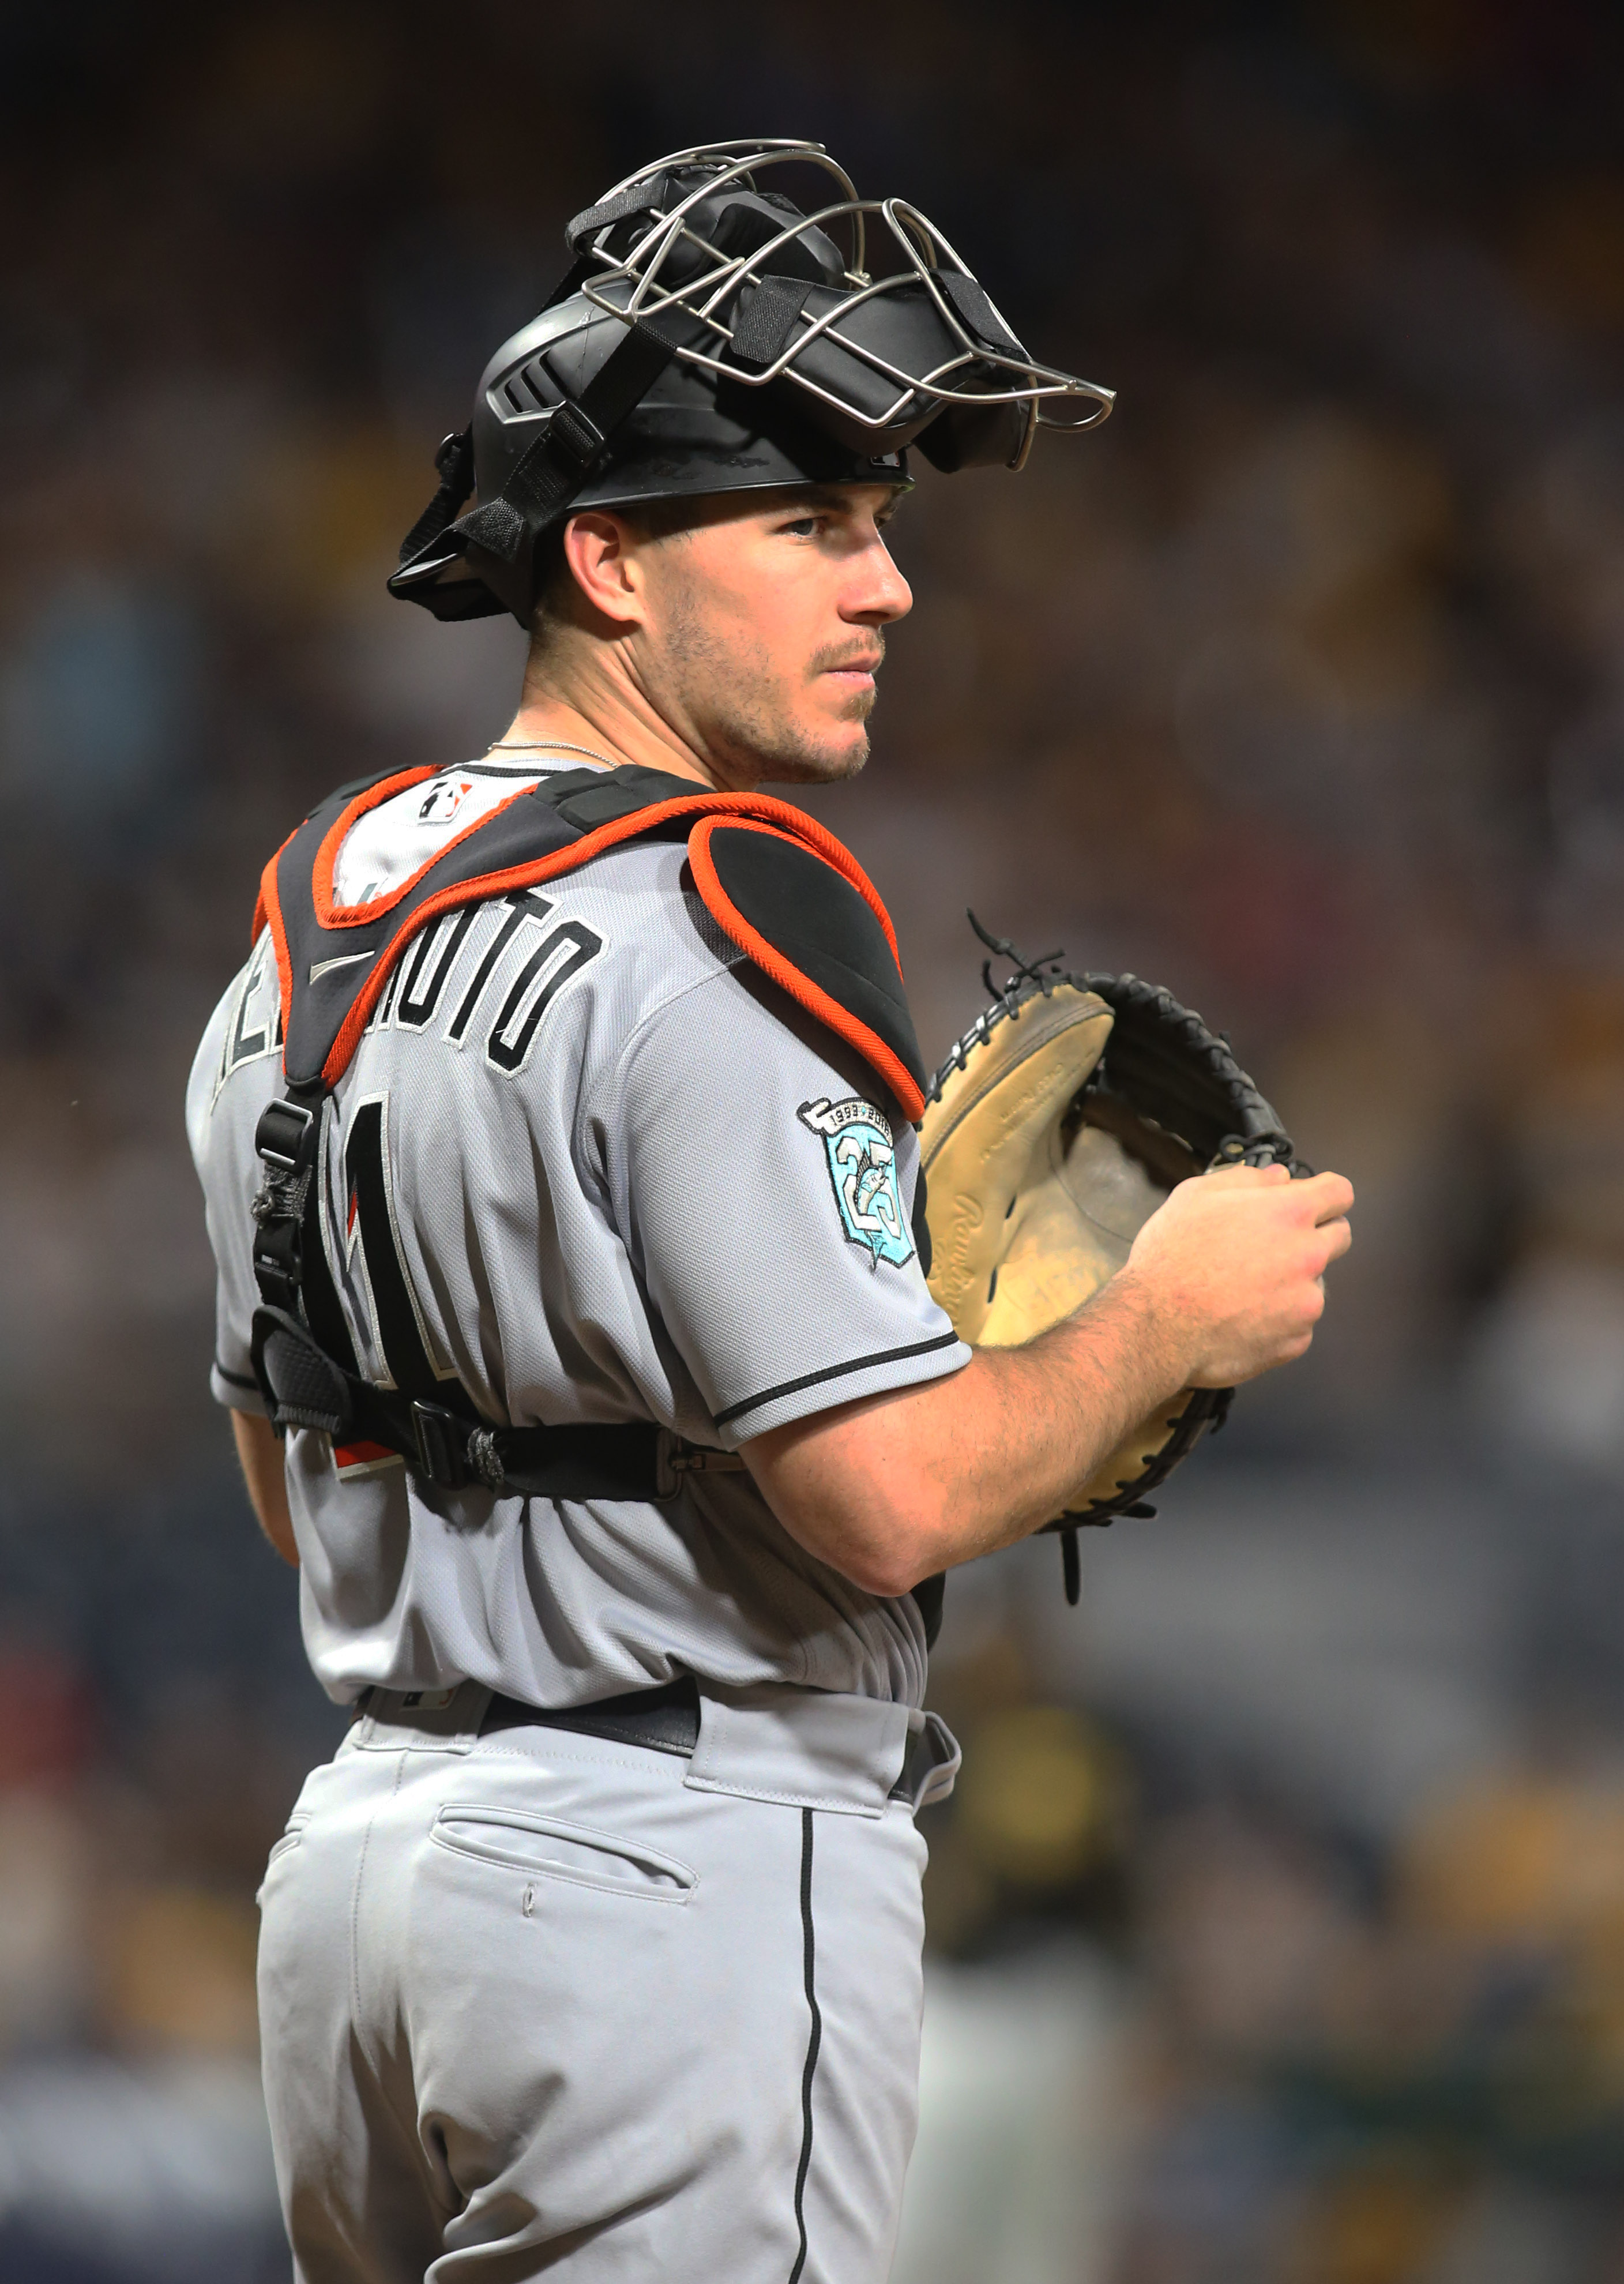 J.T. Realmuto could be this decade's Jayson Werth for the Phillies